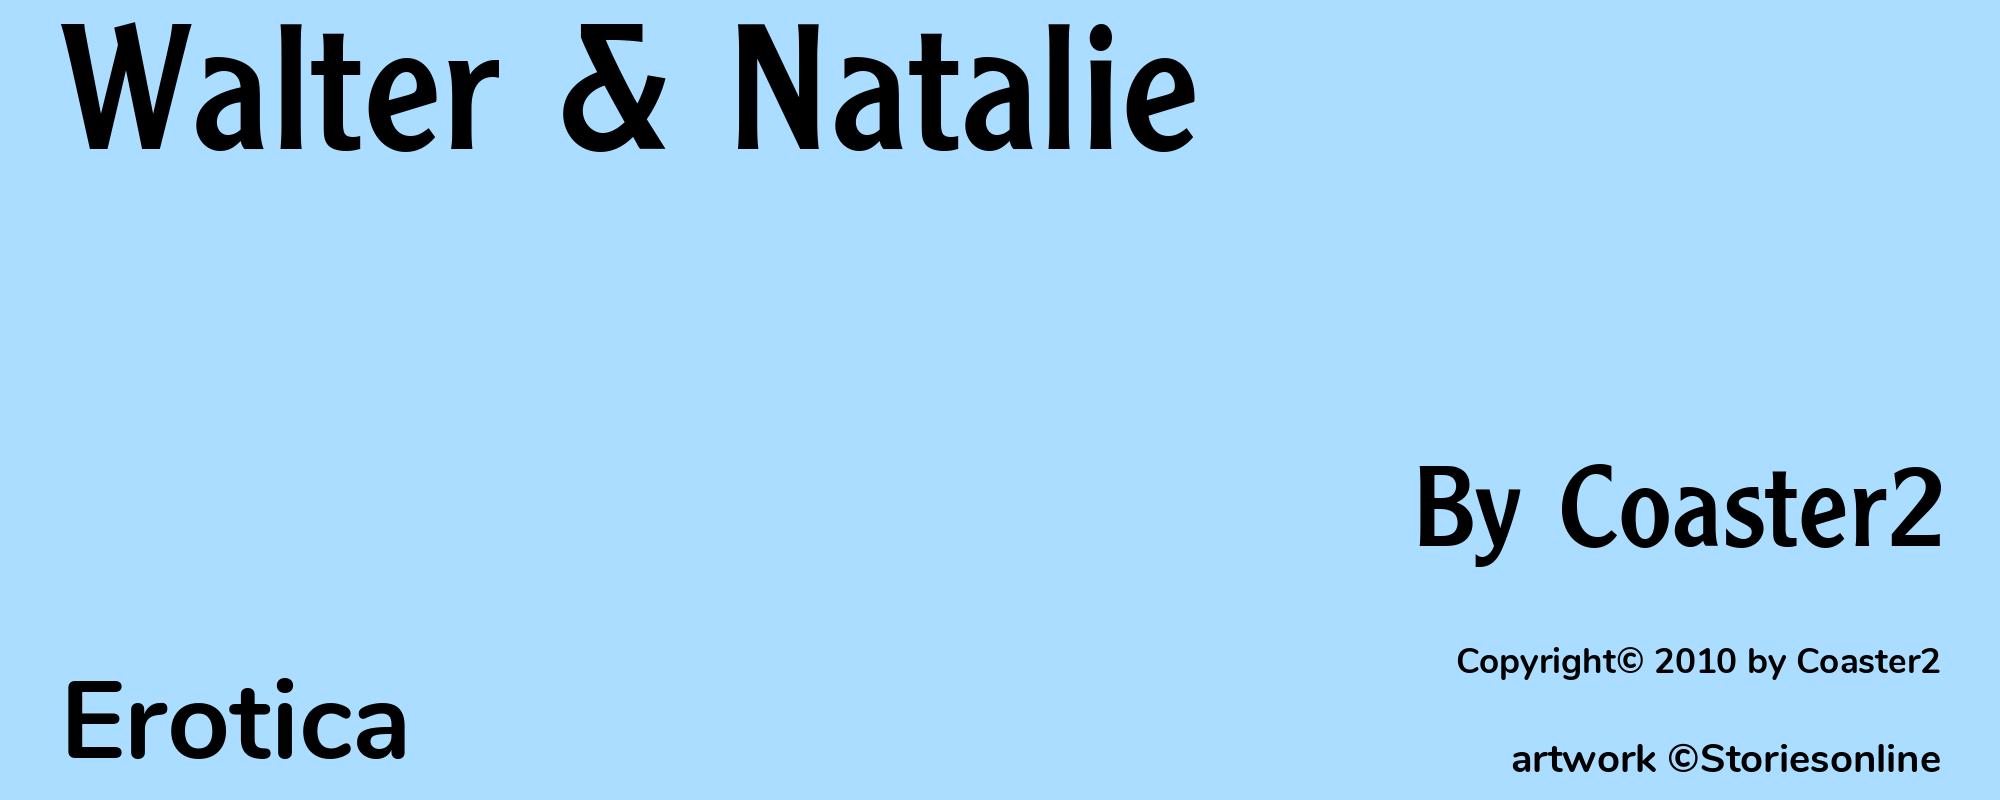 Walter & Natalie - Cover